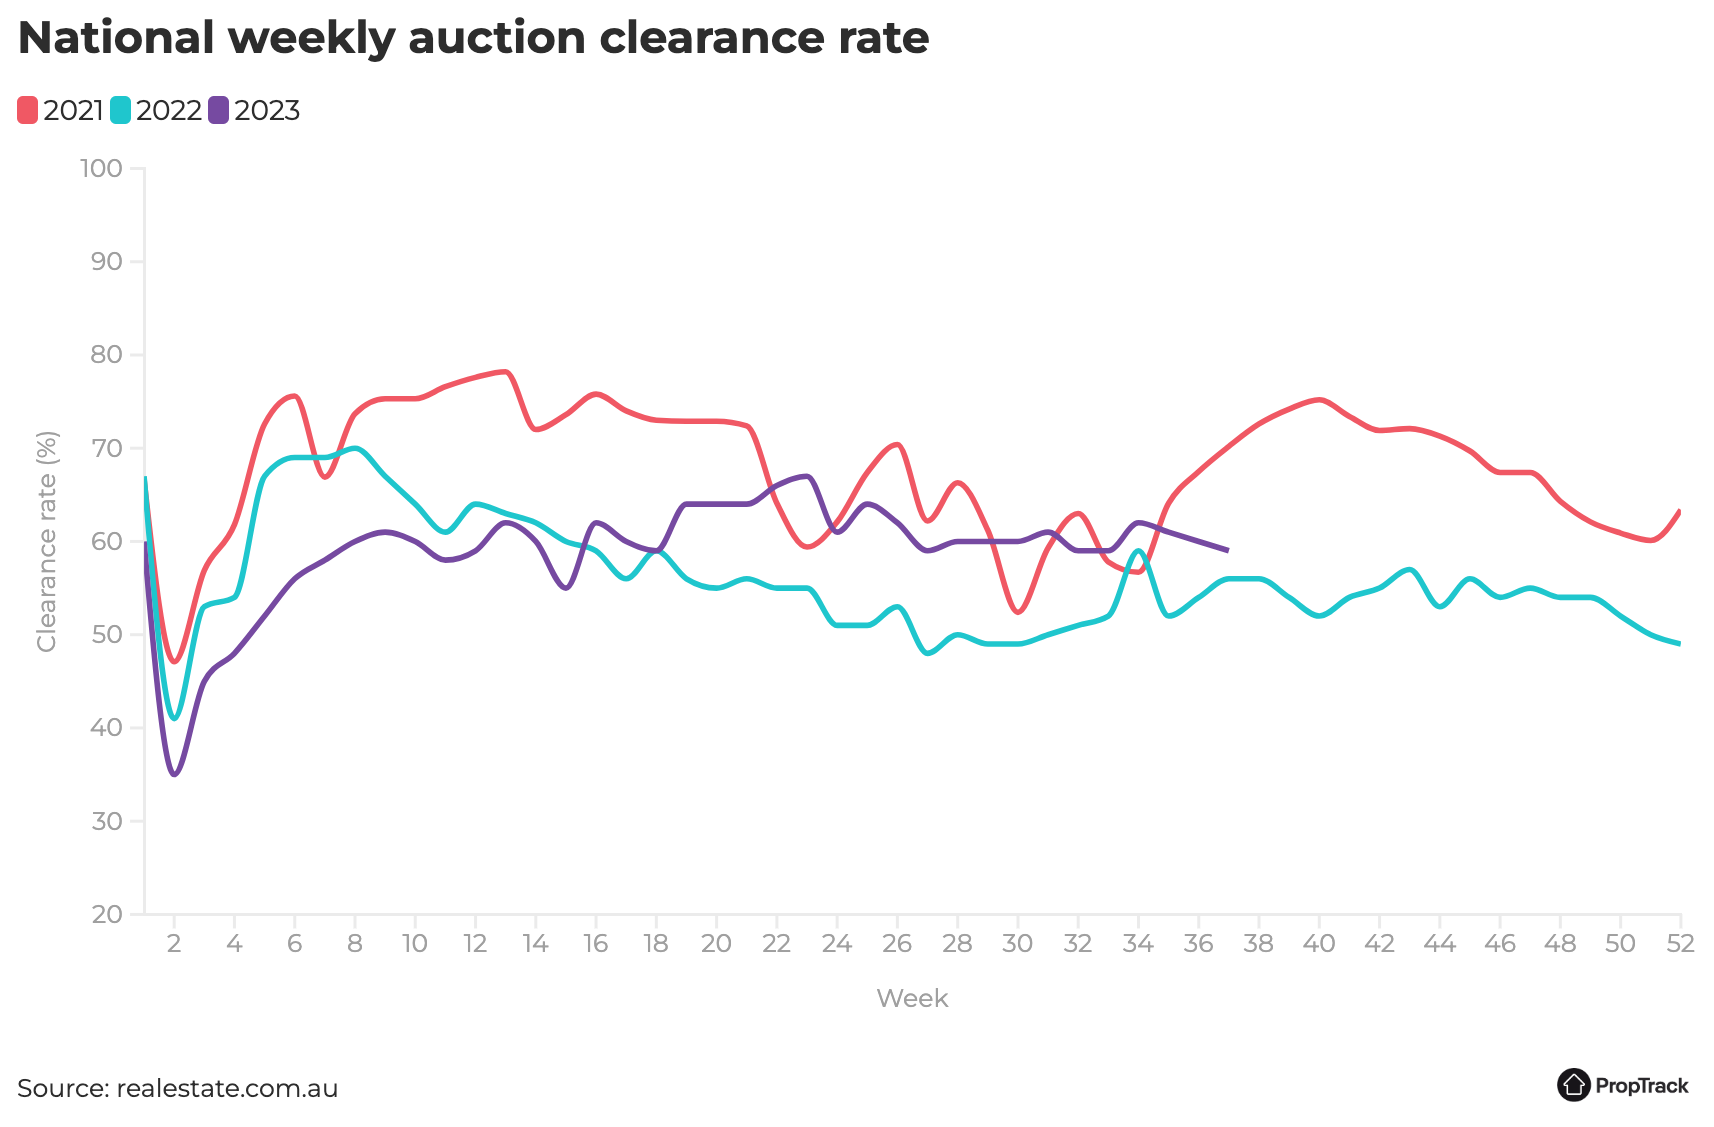 Chart showing the national weekly auction clearance rate - 2021, 2022 and 2023